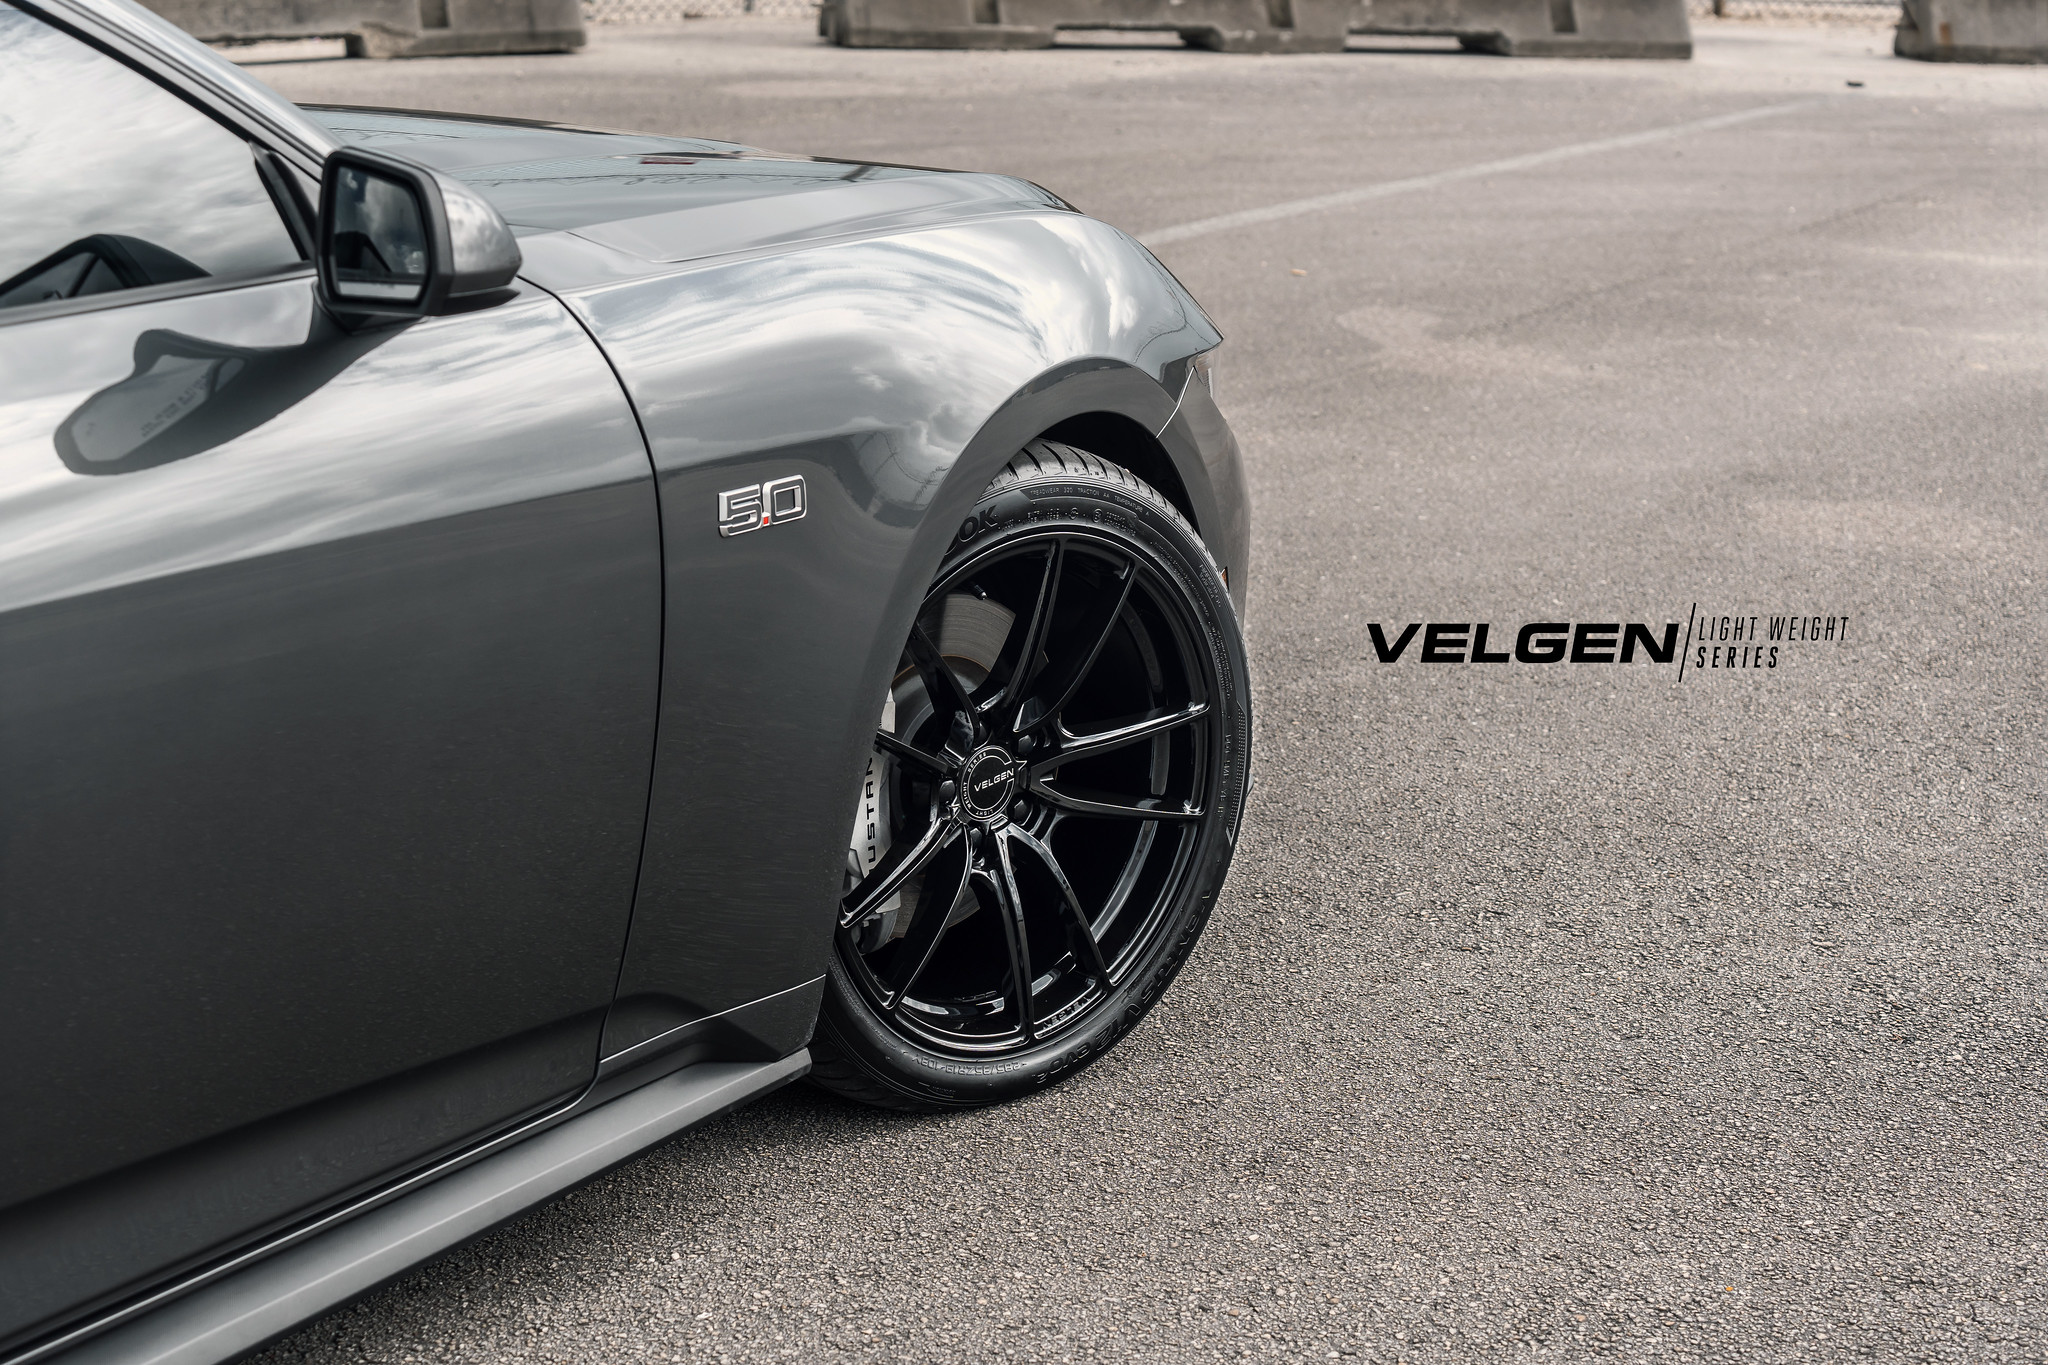 S650 Mustang Velgen wheels for your S650 Mustang | Vibe Motorsports 53543803066_2a03df2384_k